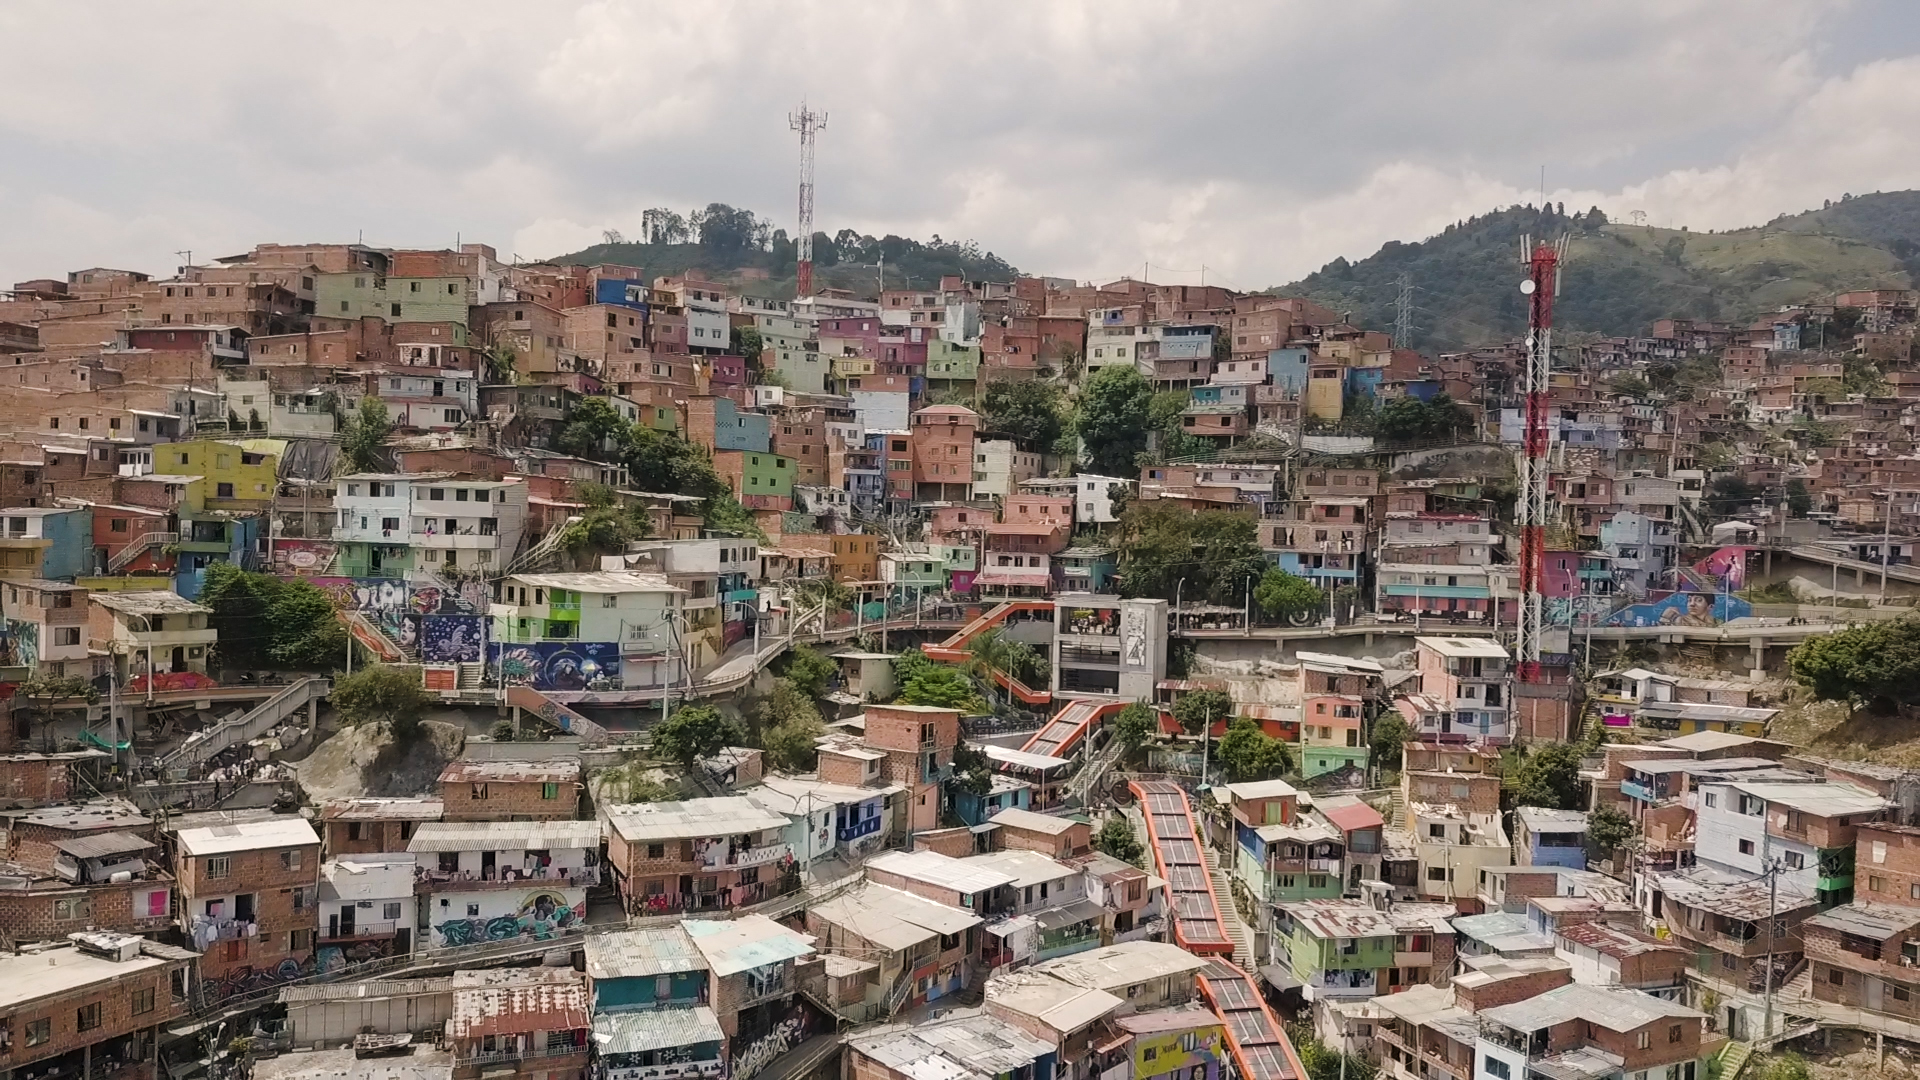 Learn how the city of Medellín, Columbia has re-invented itself